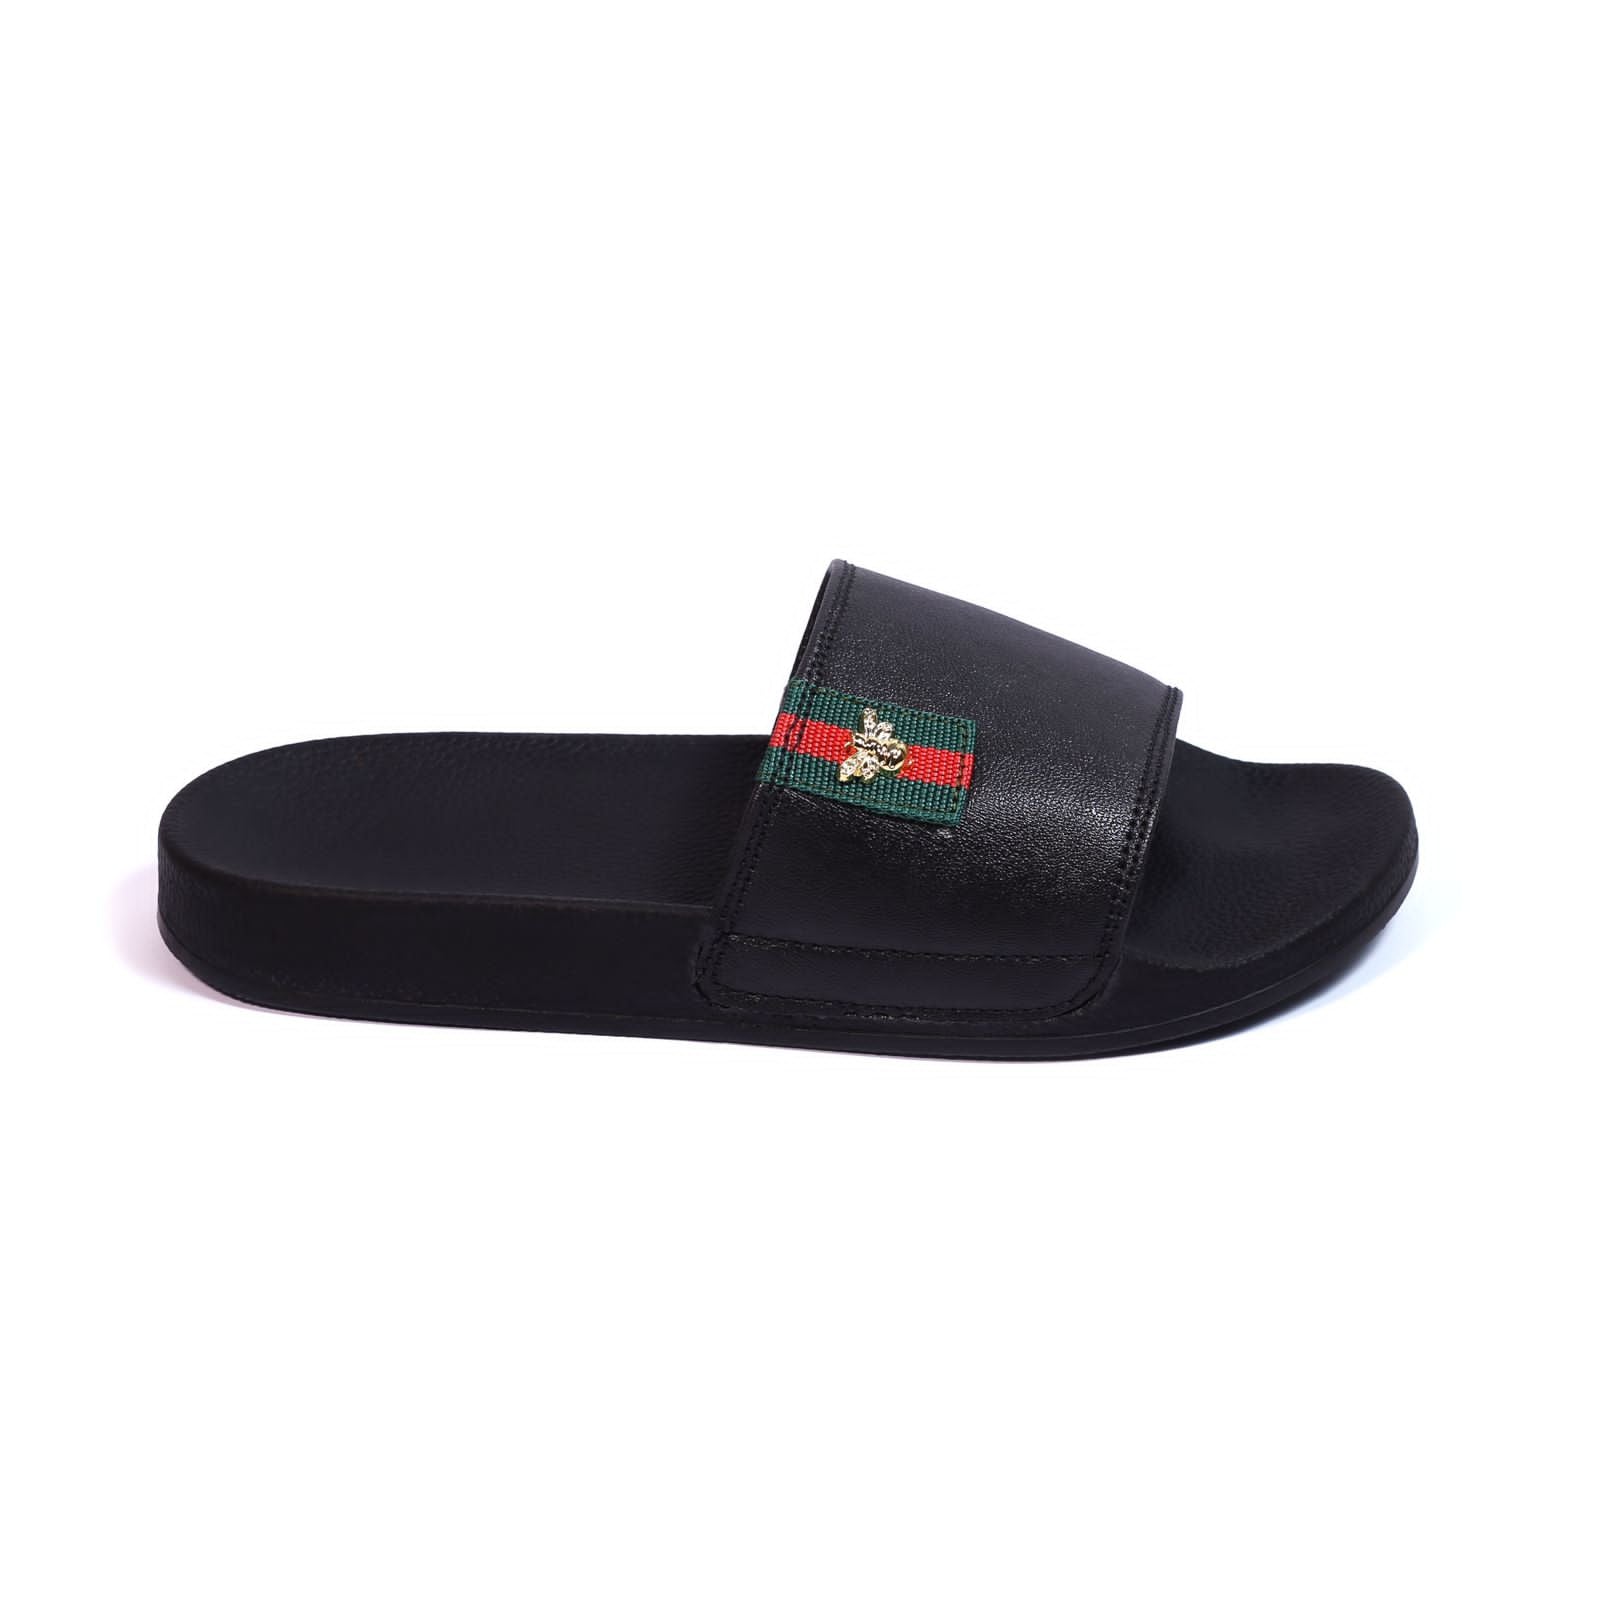 TMS BRANDED SLIPPERS 25